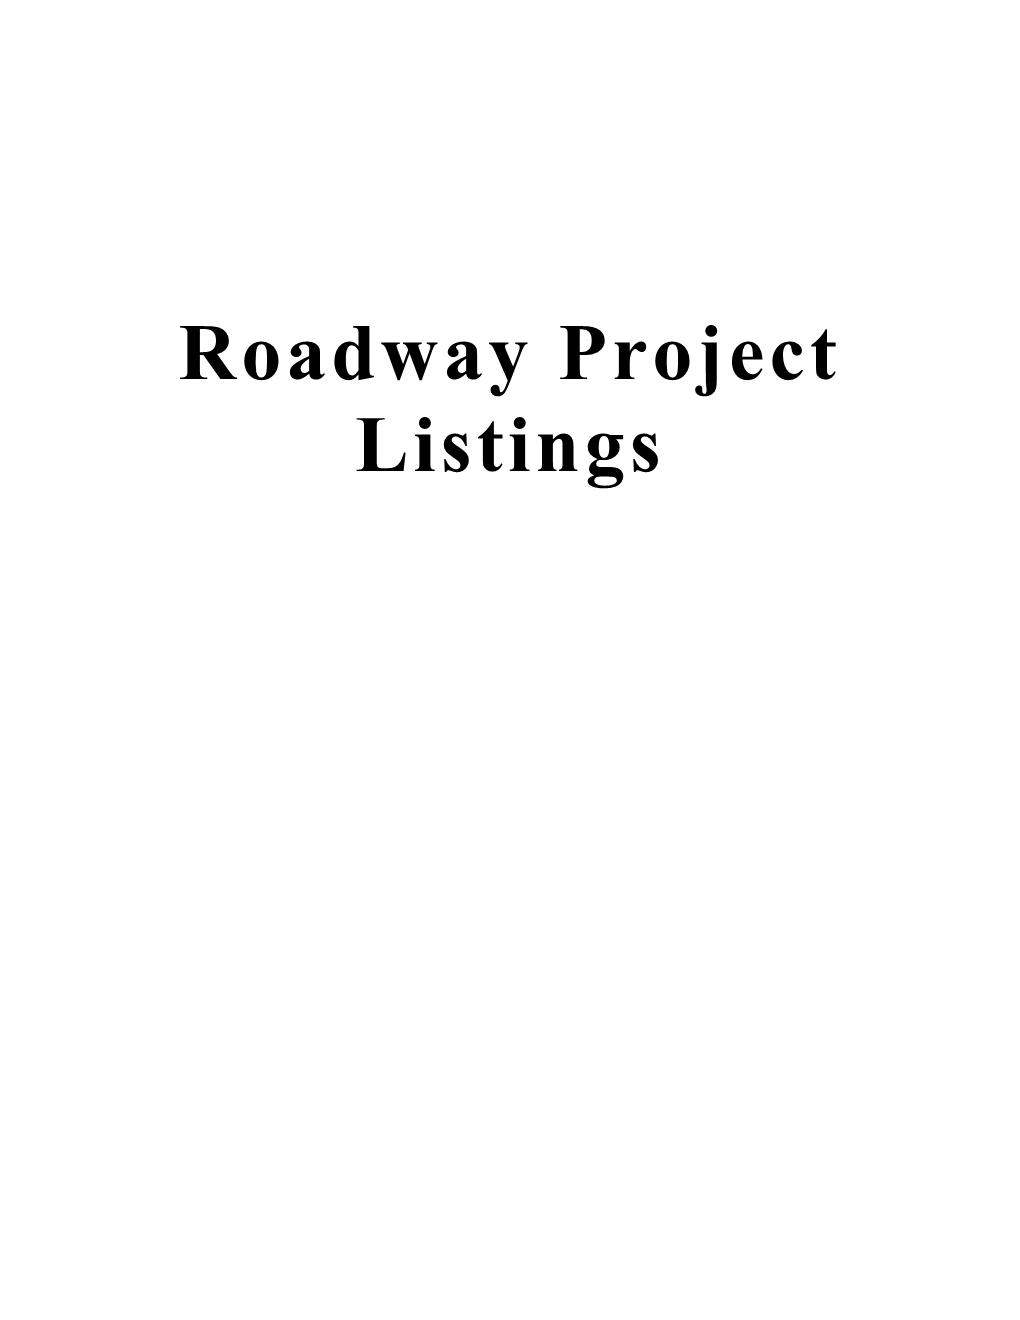 Roadway Project Listings